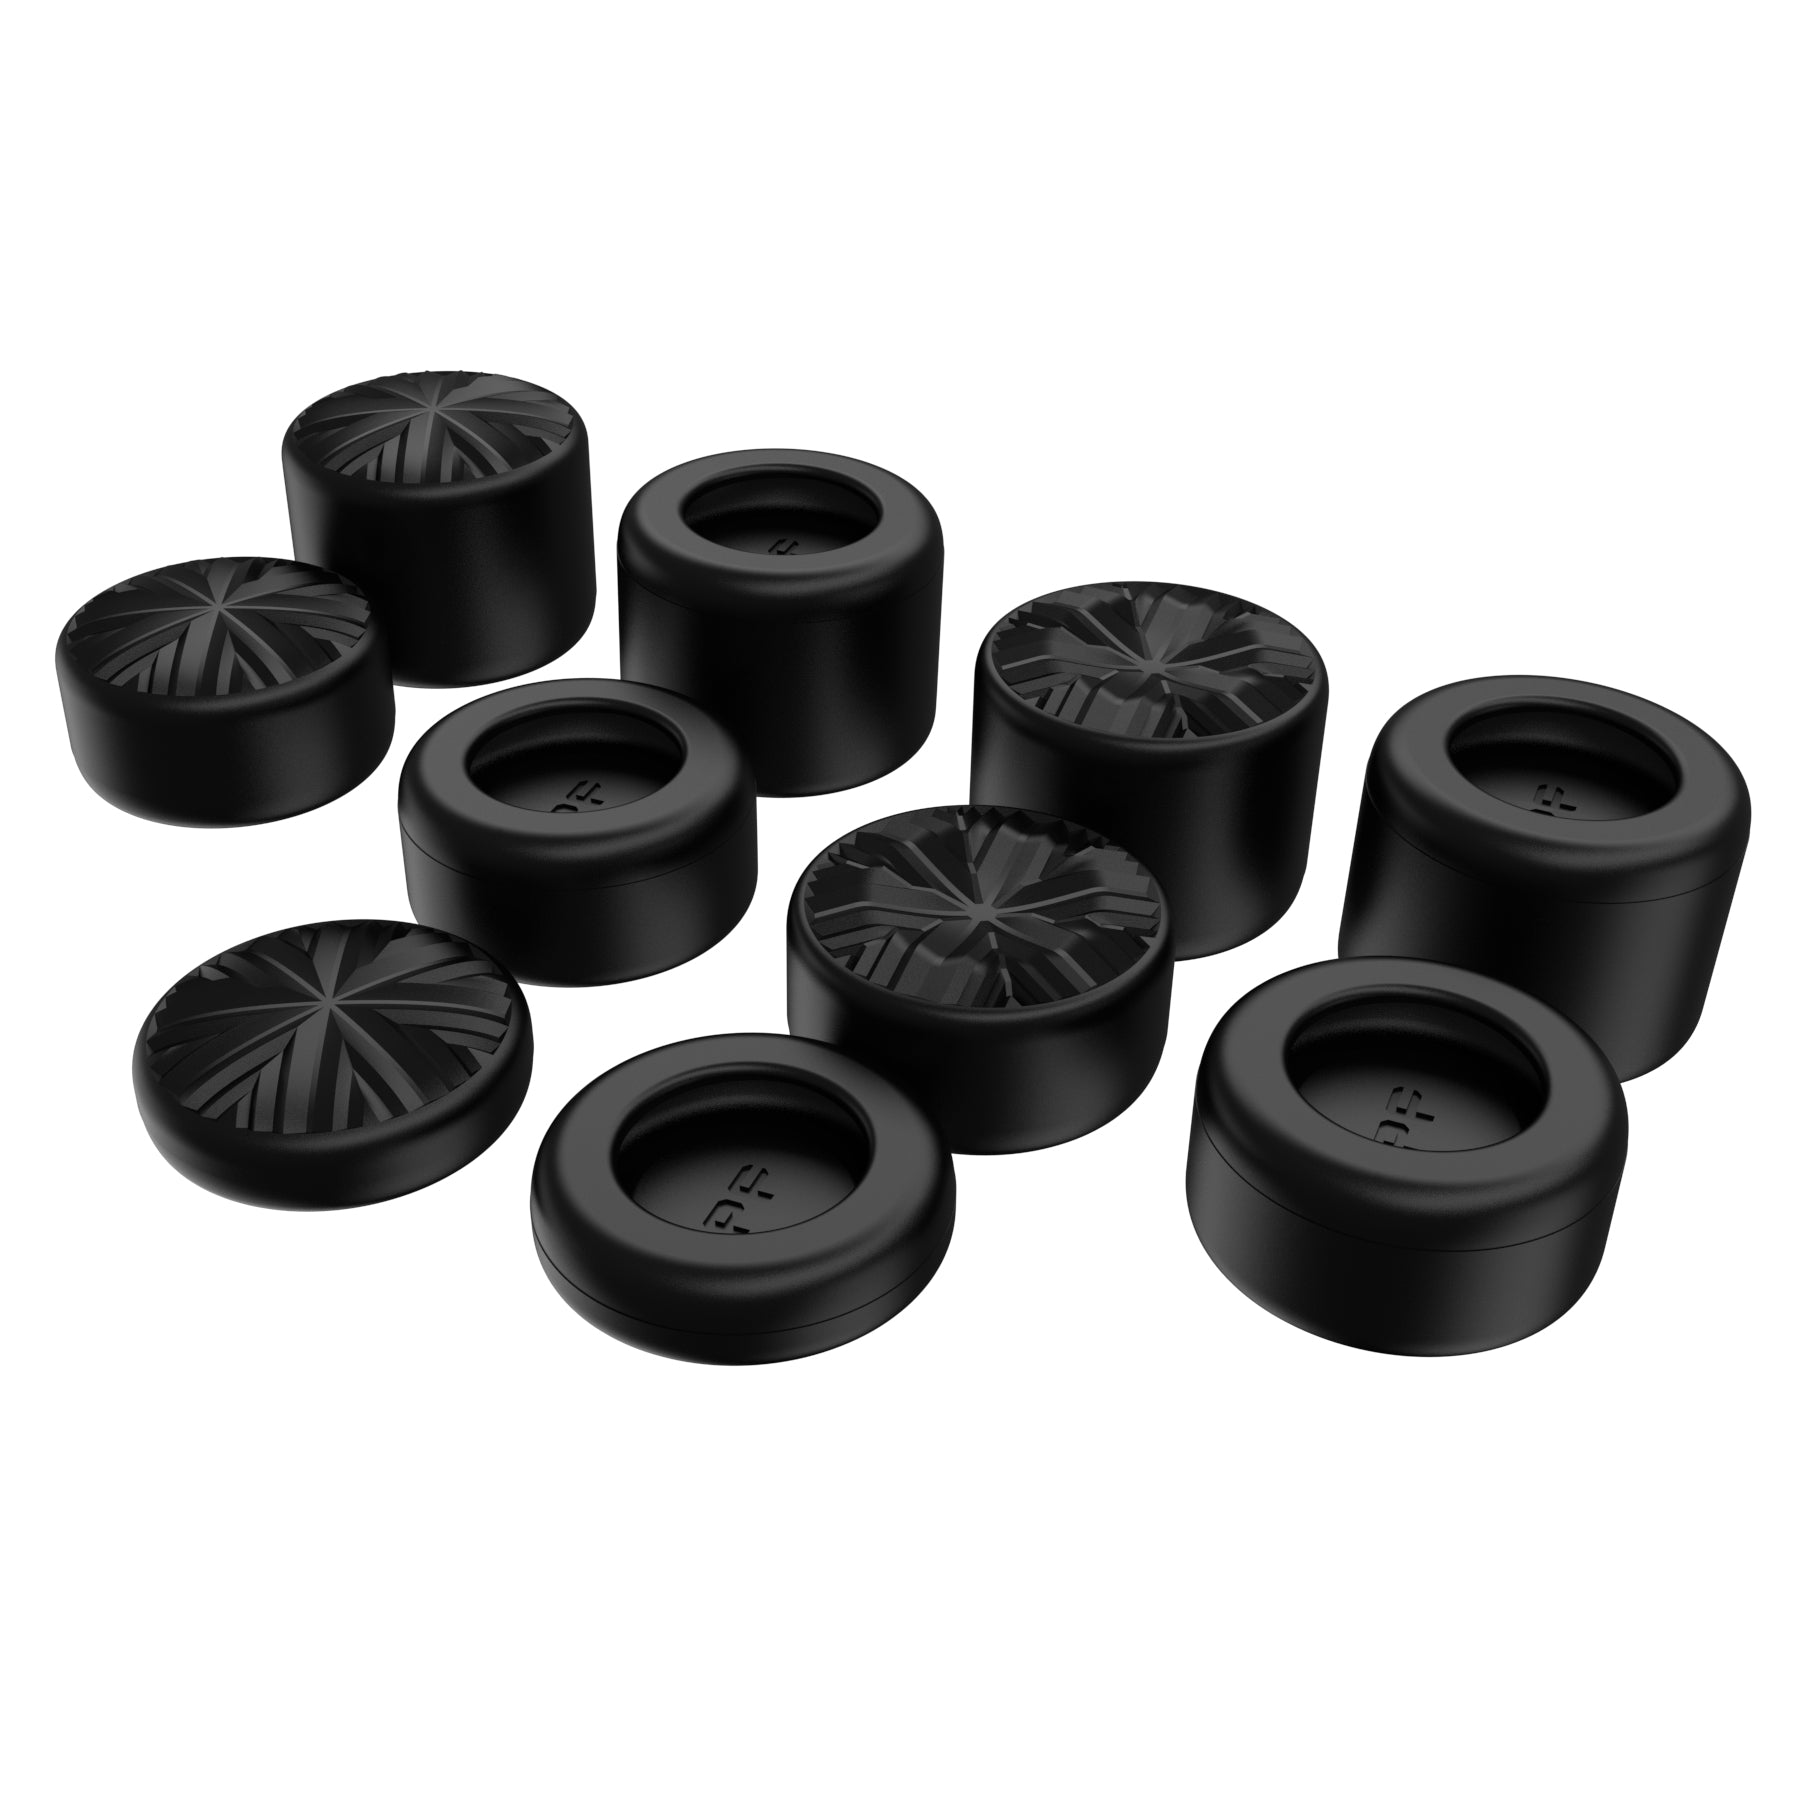 PlayVital 10 Pcs Ergonomic Thumbstick Grips for ps5, for ps4, EVOQUE Universal Pro Thumb Grip Caps for Xbox Series X/S, Xbox One/Elite Series 2, Switch Pro - with 3 Height Convex and Concave - Black - PJM2050 PlayVital